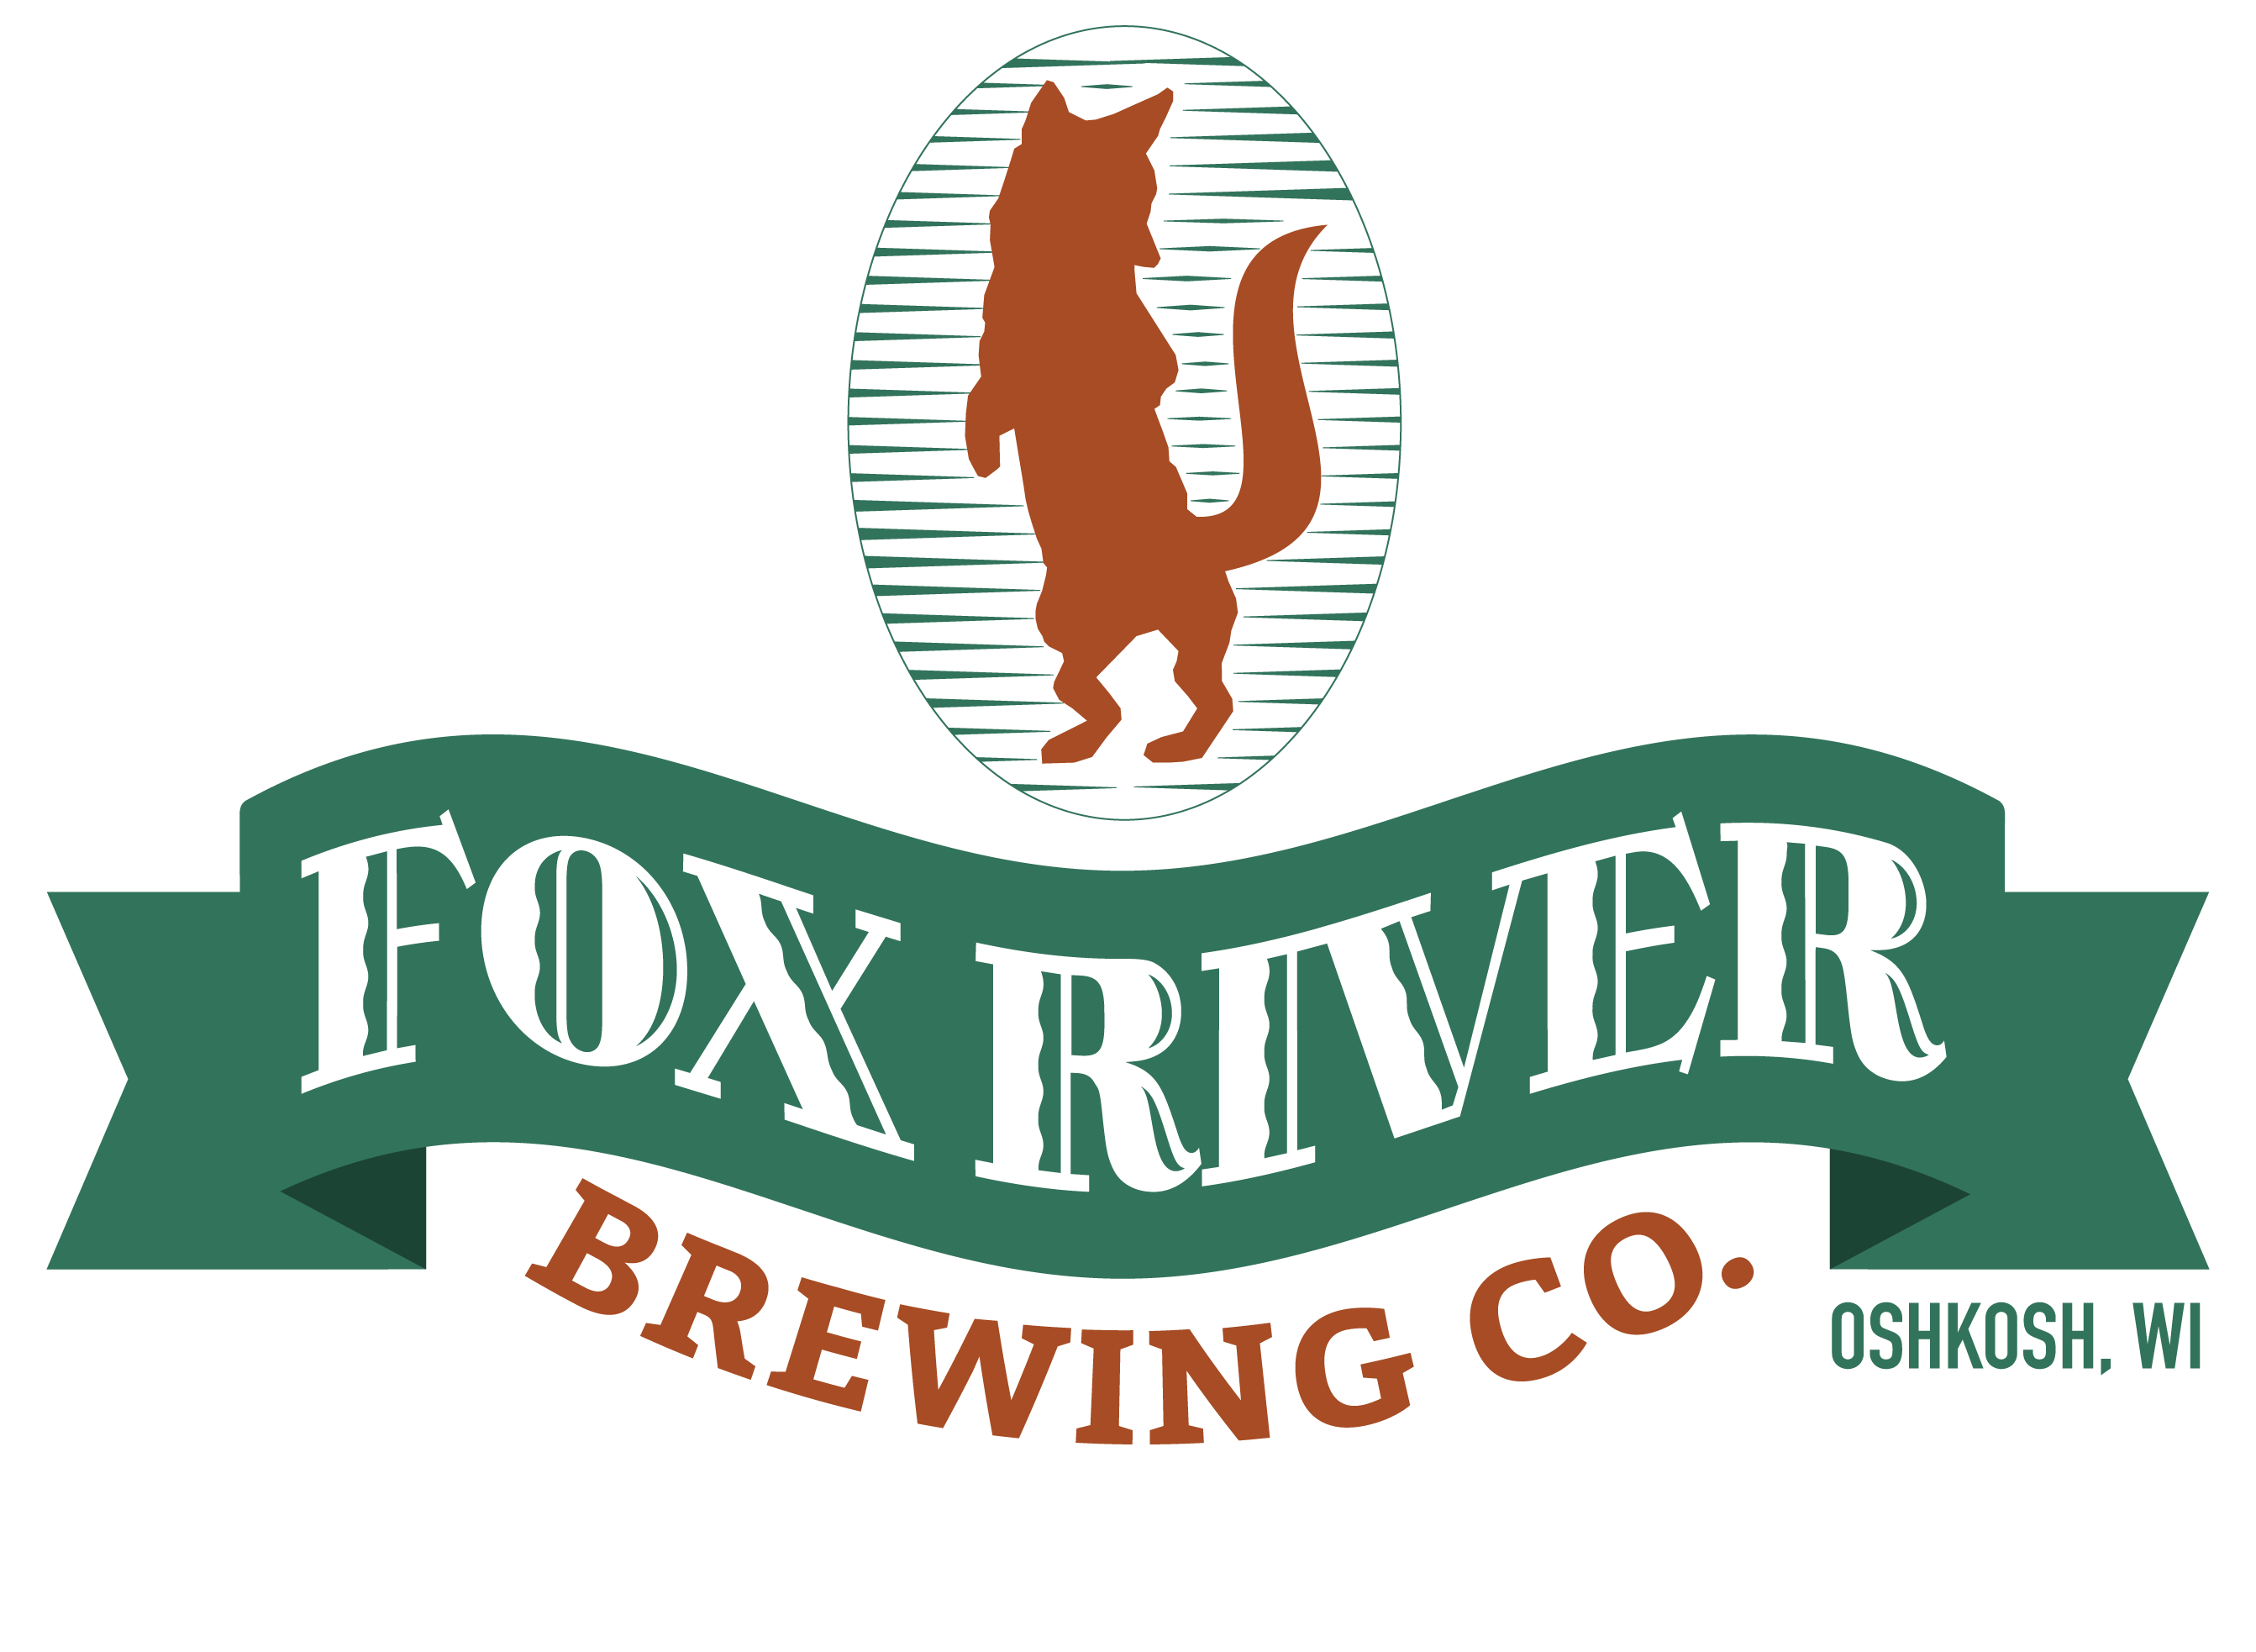 Fox River Brewery Waterfront Restaurant and Brewery - Oskosh